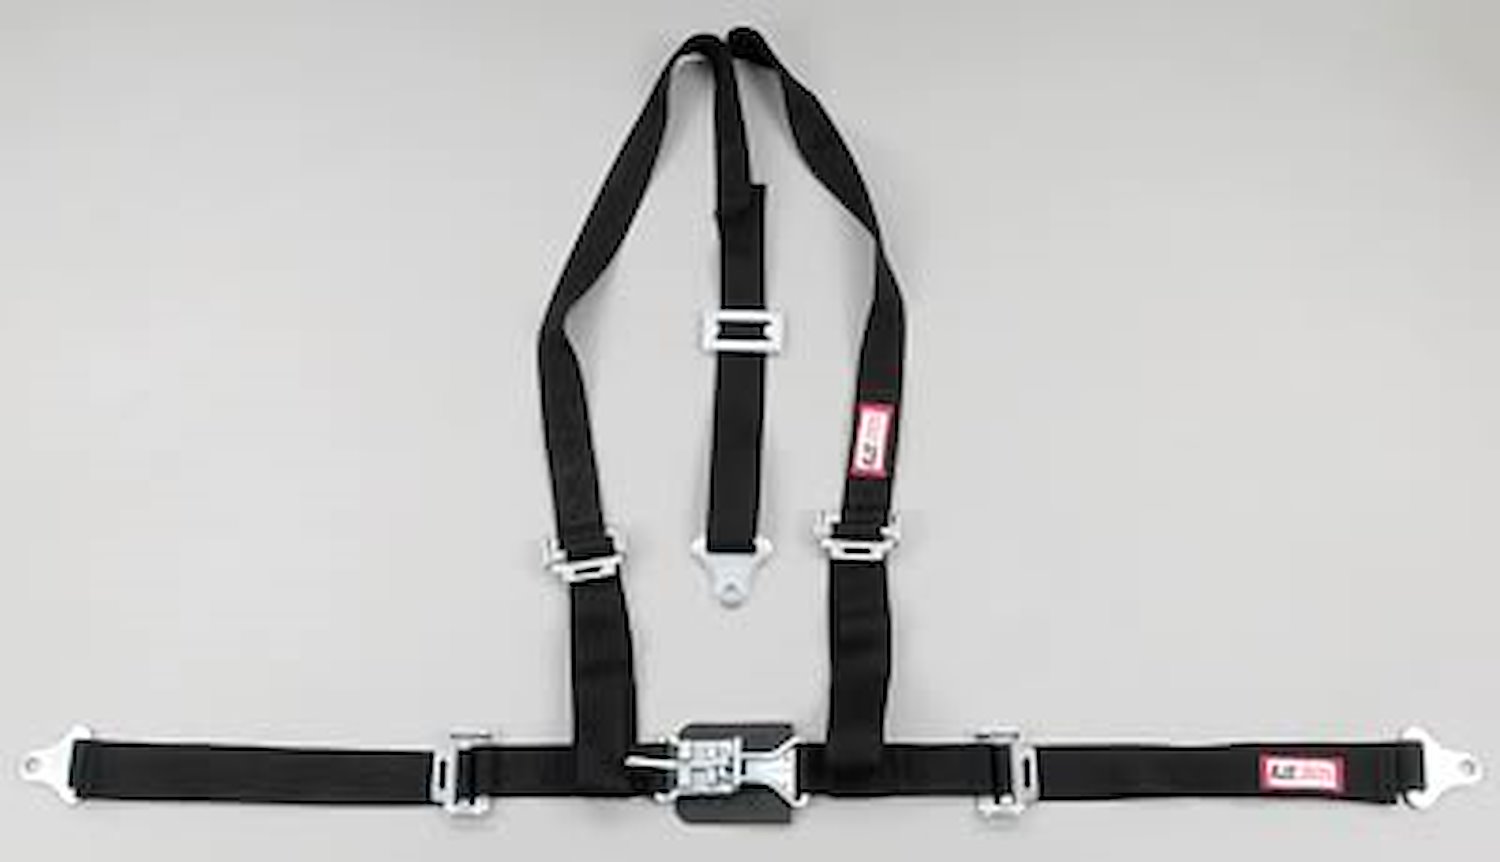 NON-SFI L&L HARNESS 3 PULL DOWN Lap Belt SNAP SEWN IN 2 S.H. Individual FLOOR Mount WRAP/SNAP RED